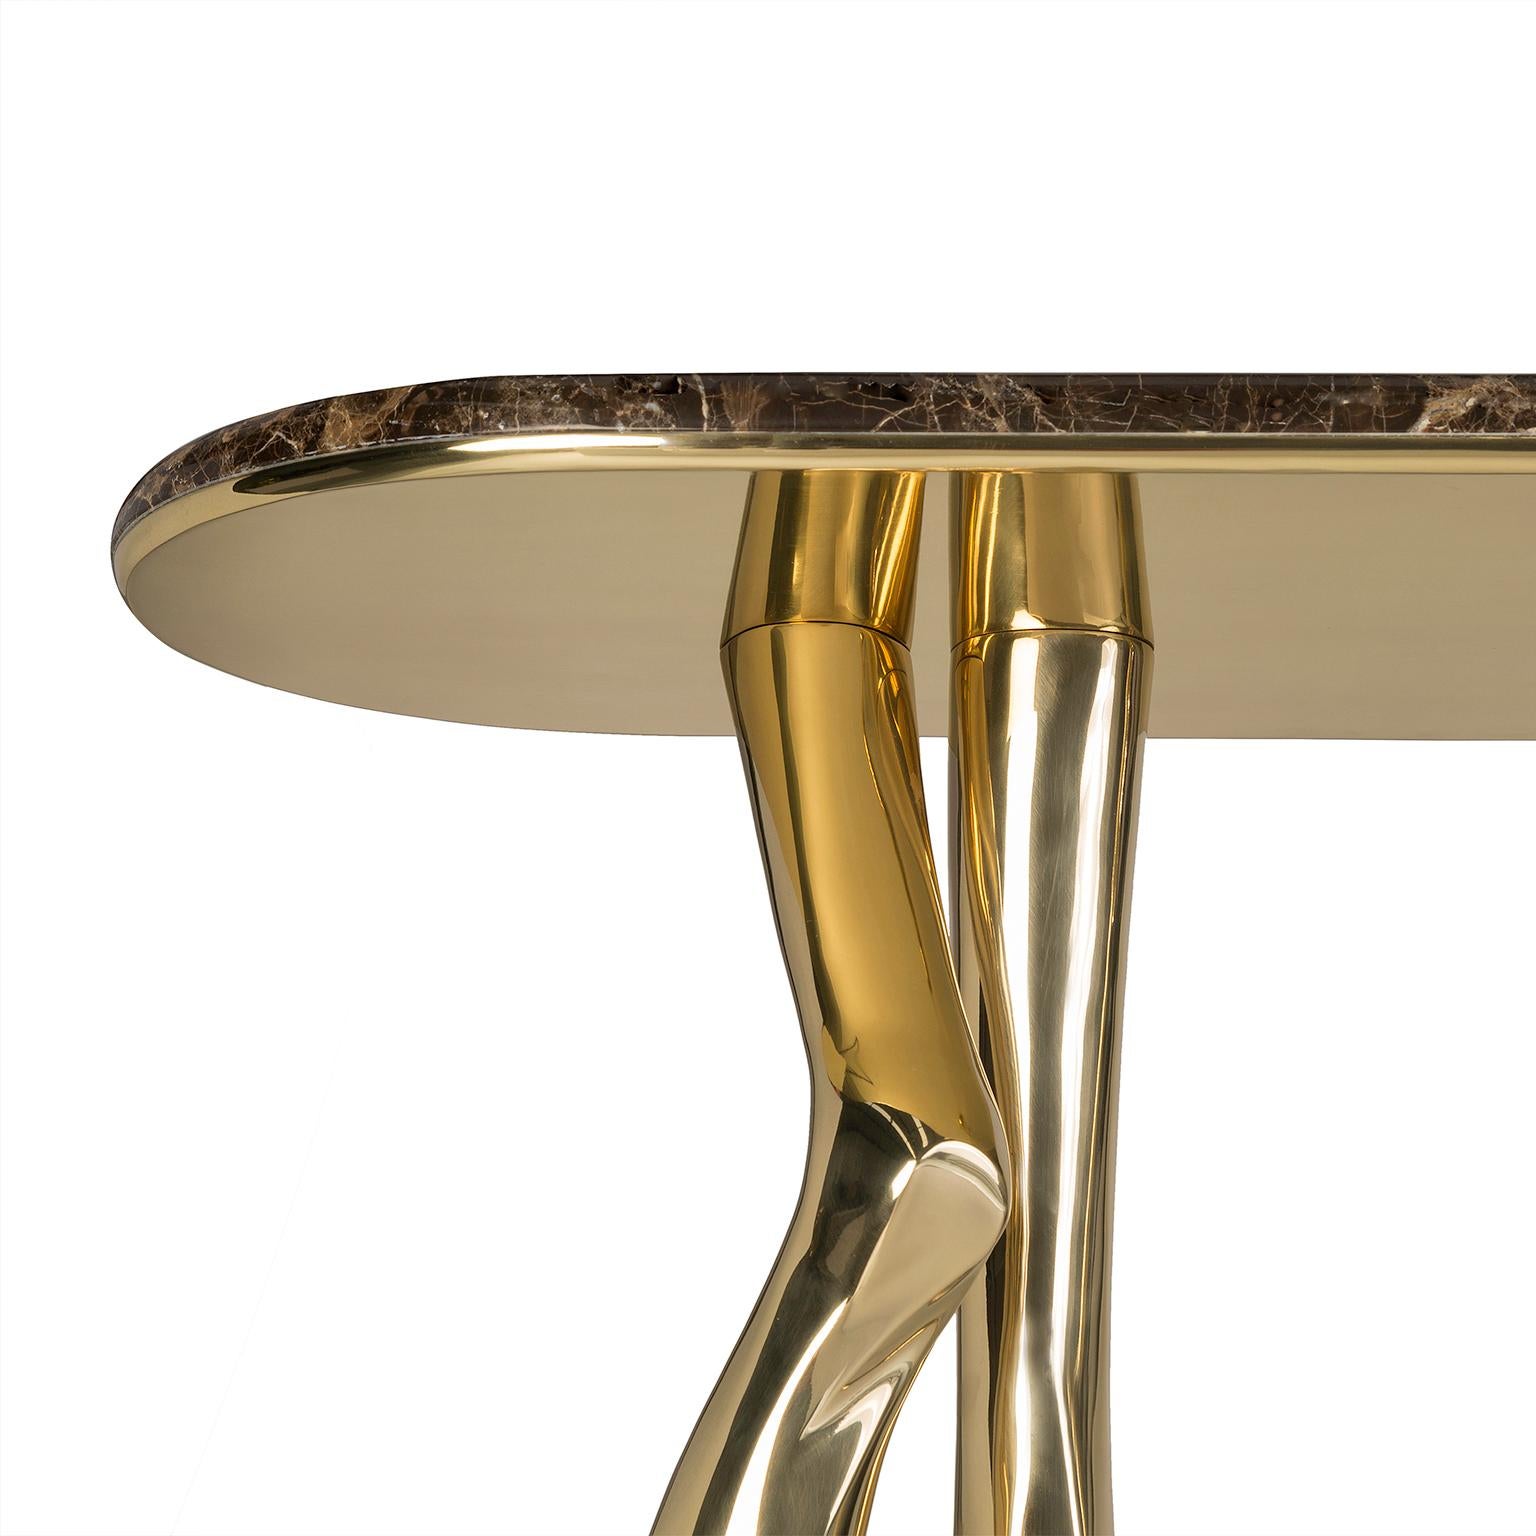 Modern Monroe Console Table, Polished Brass, Emperador Marble, Art Console For Sale 1